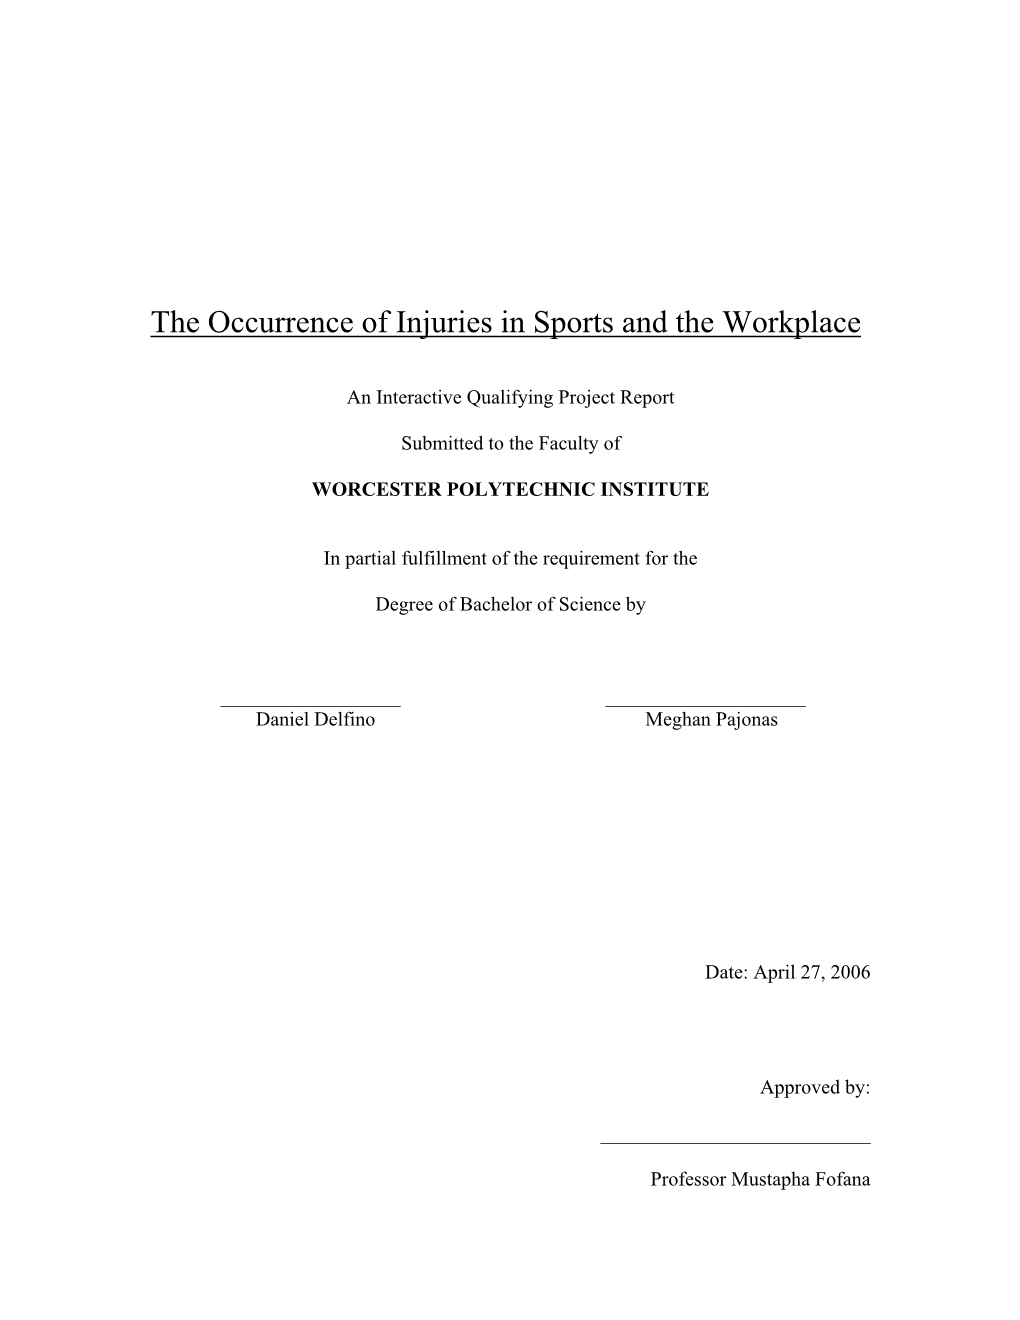 CHAPTER I: the Occurrence of Injuries in Sports and the Workplace